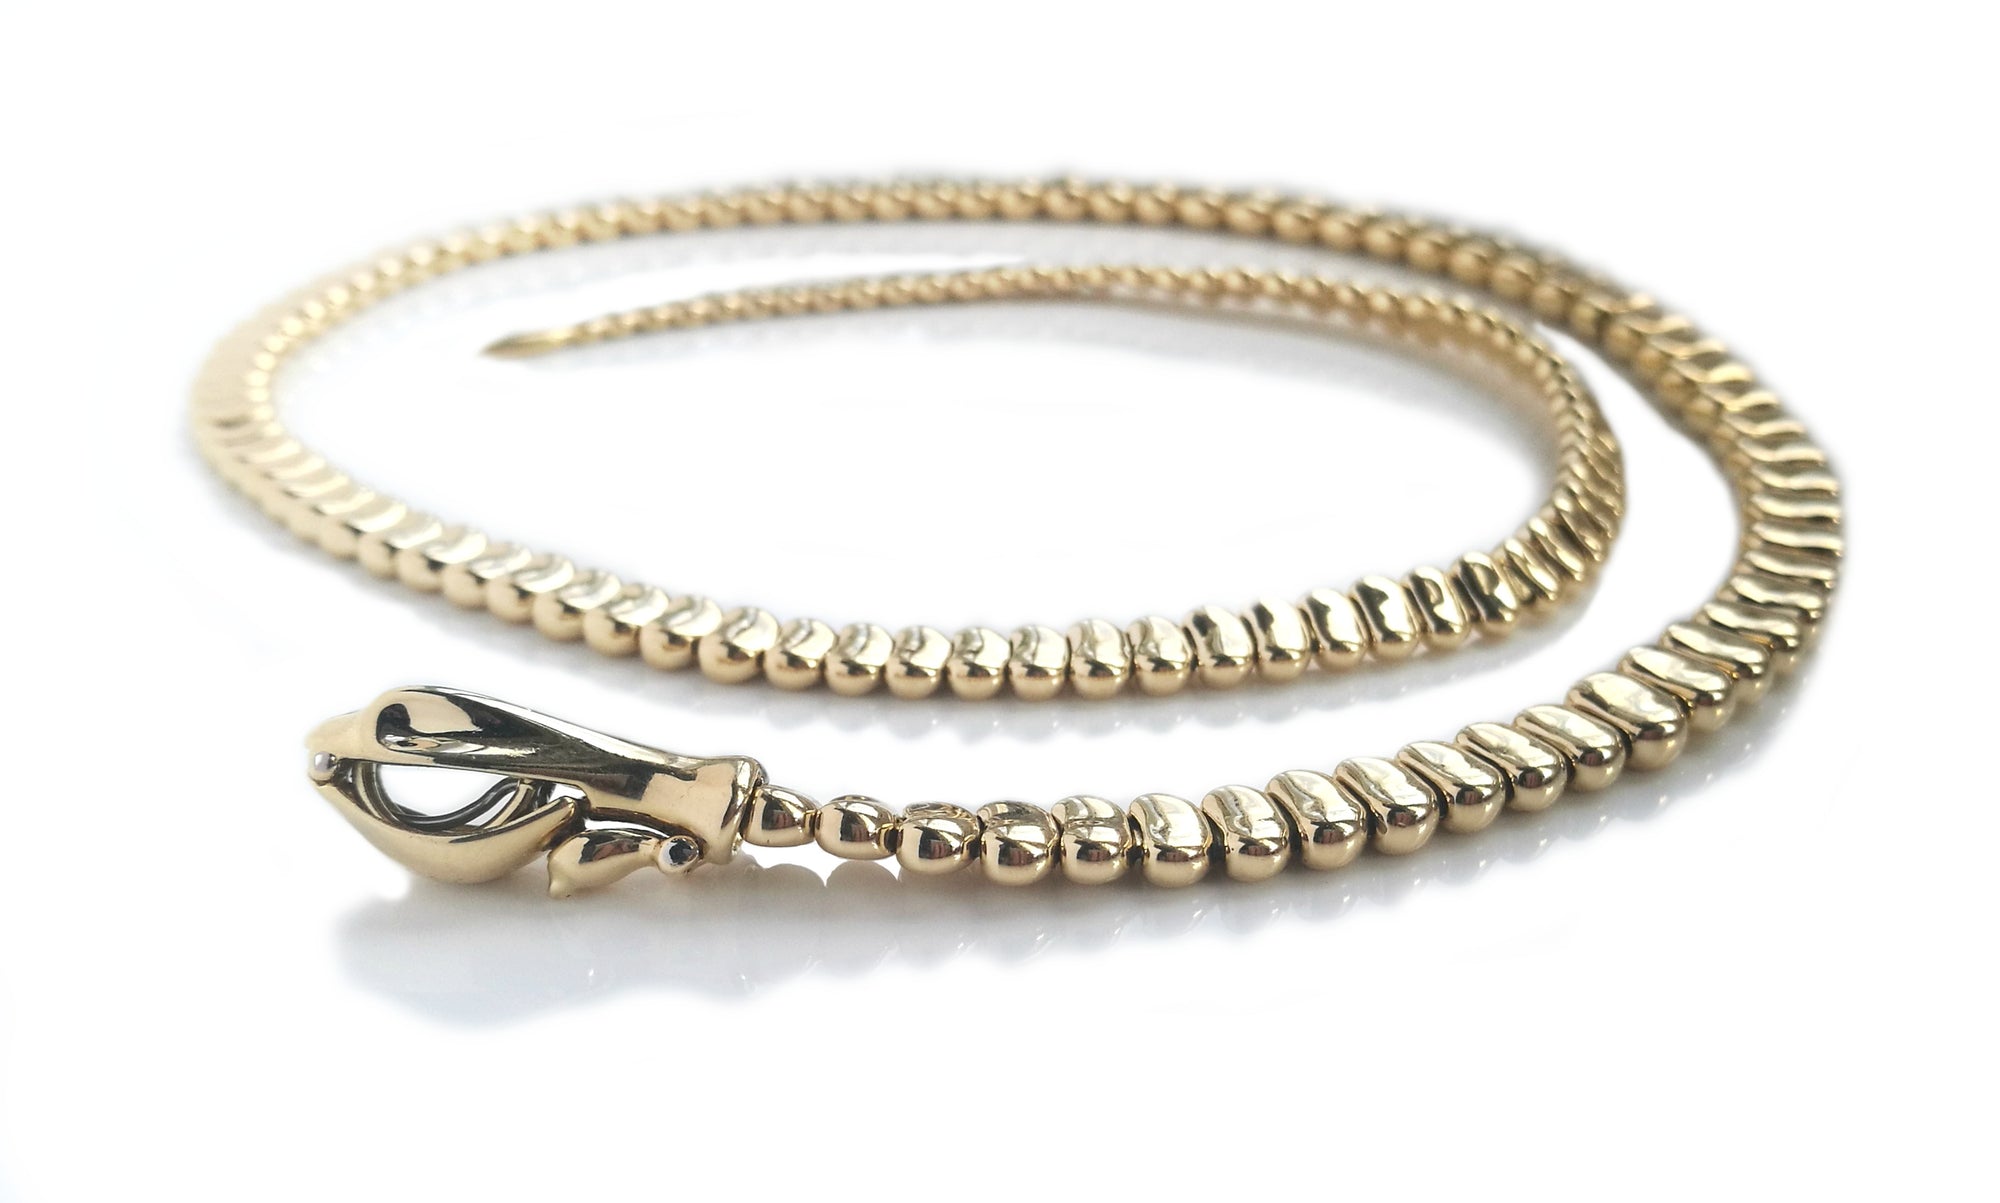 Tiffany & Co. Snake / Serpent Necklace in 18k Yellow Gold, 20 inch